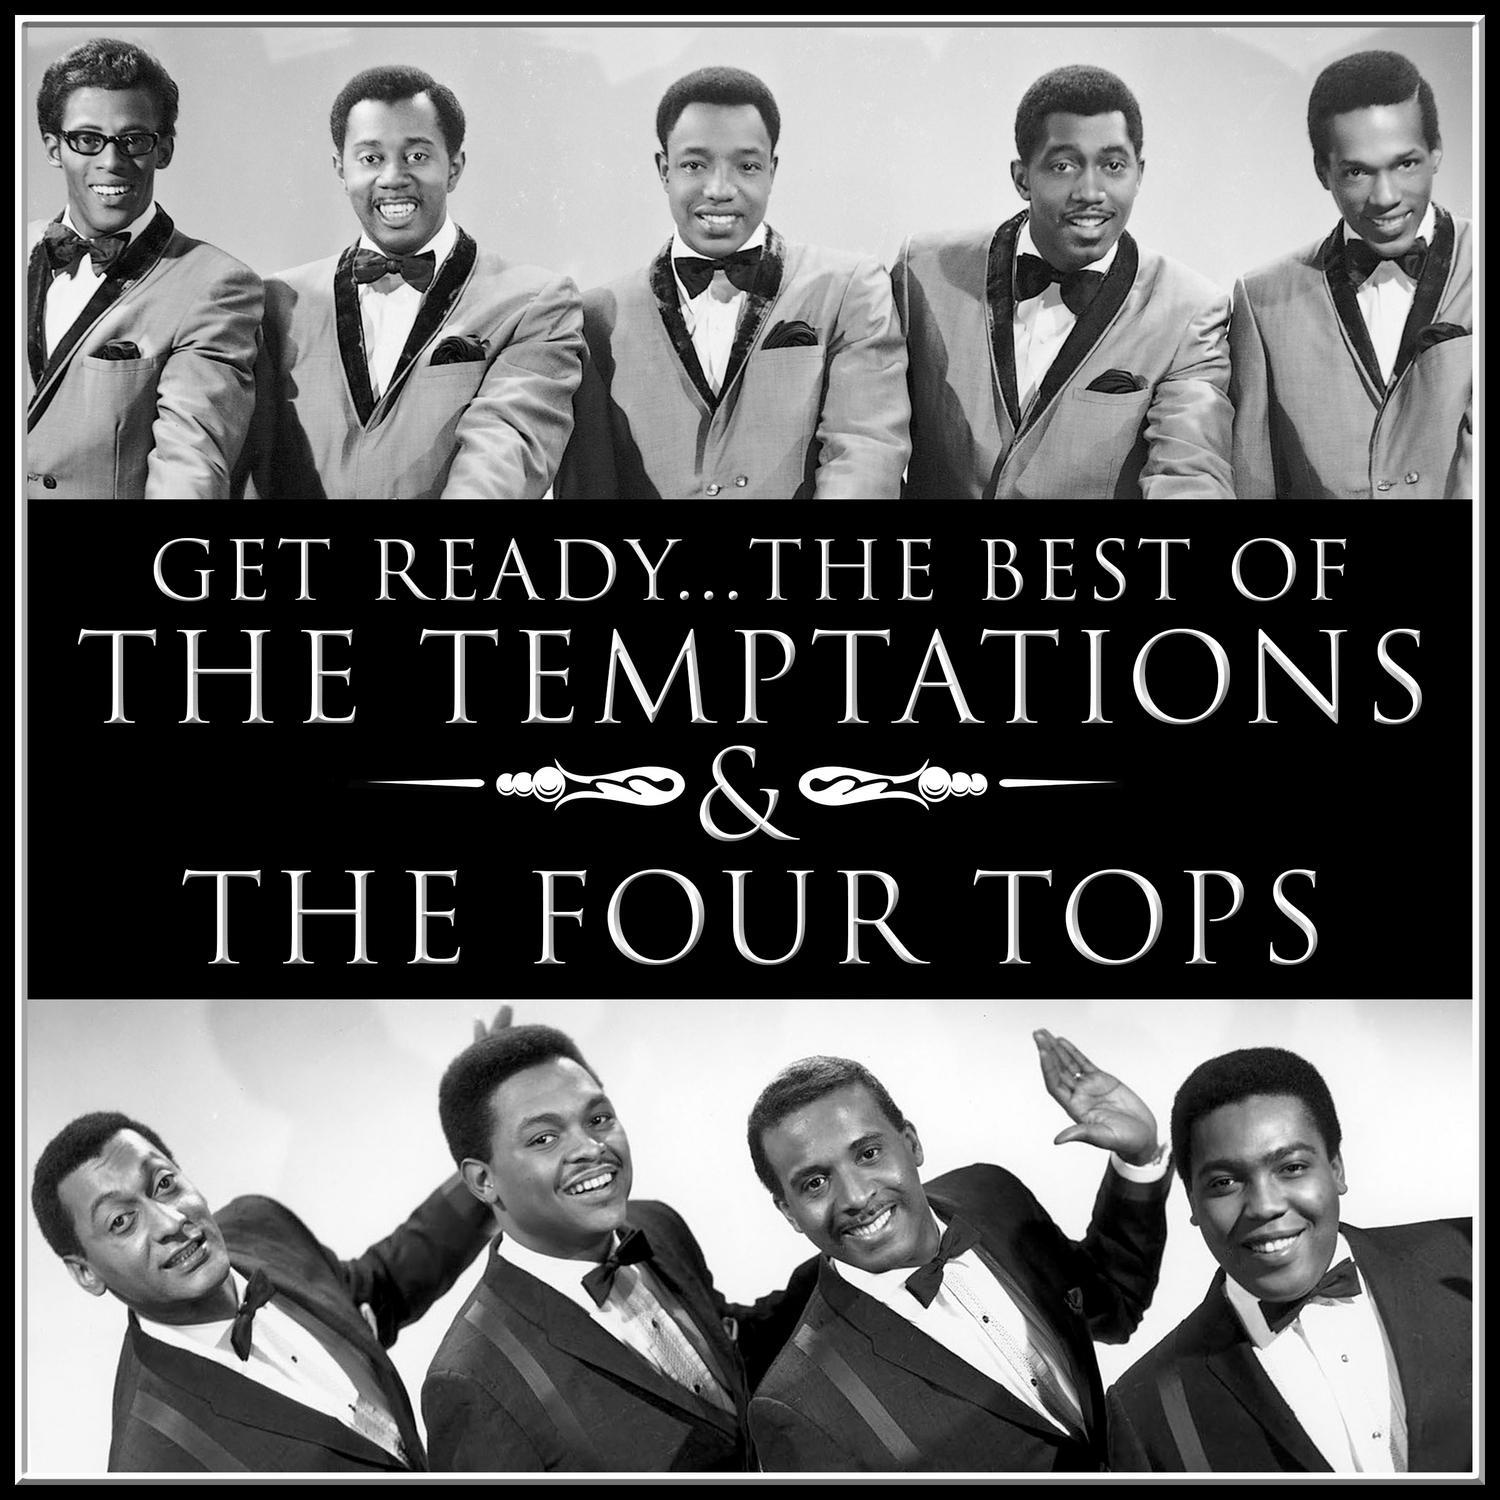 Get Ready… the Best of the Temptations and the Four Tops